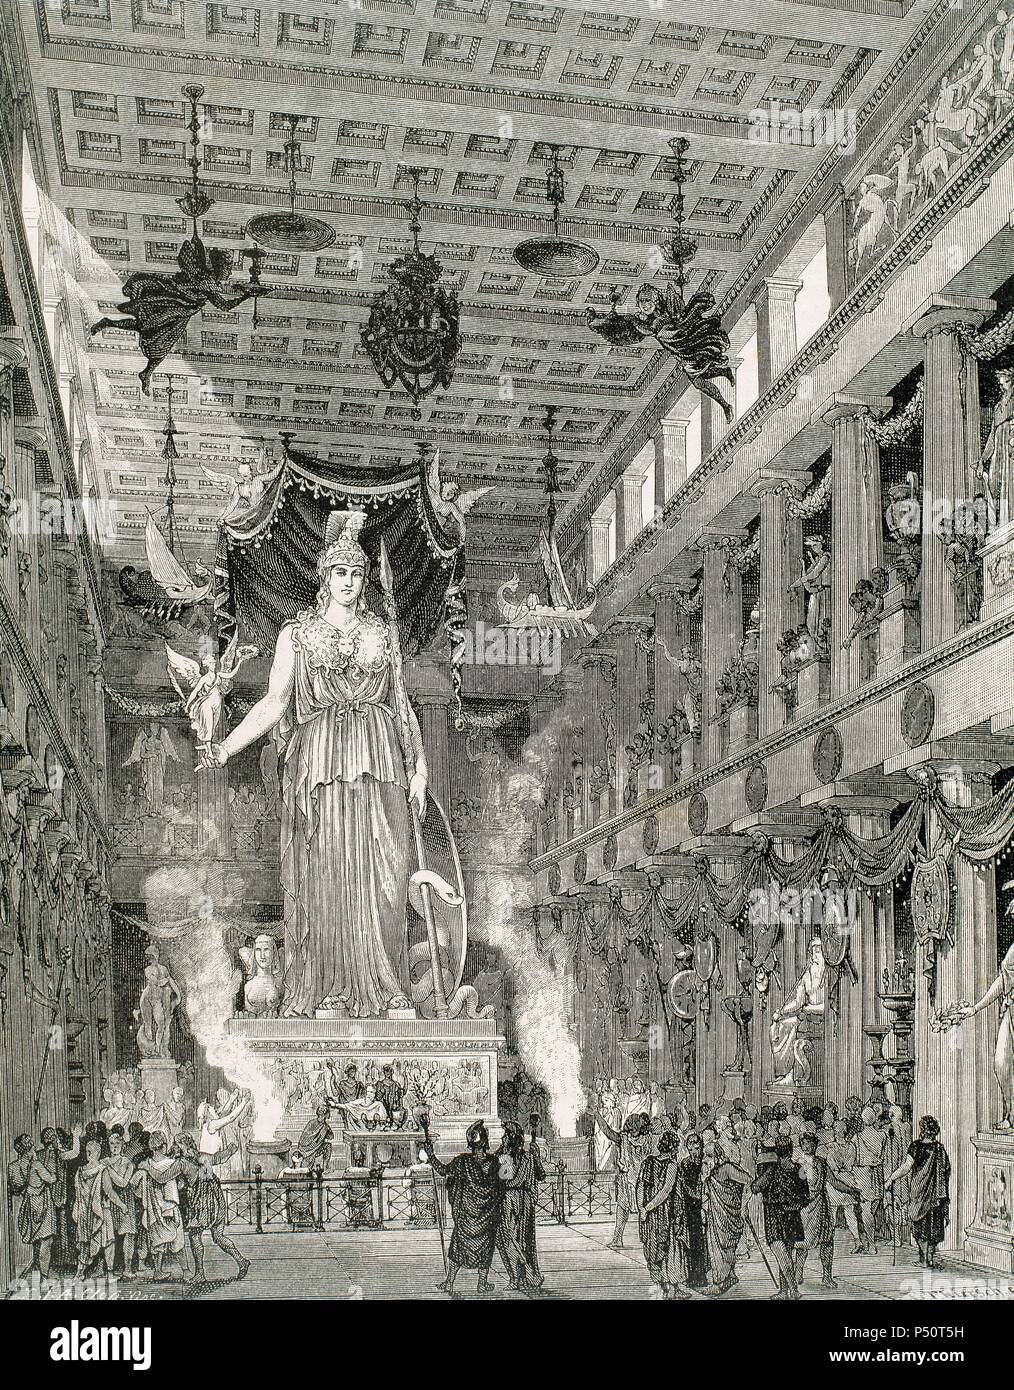 History of Greece. Athens. Reconstruction of the Parthenon. Cella where the statue of the goddess Parthenos was located. Engraving. Stock Photo